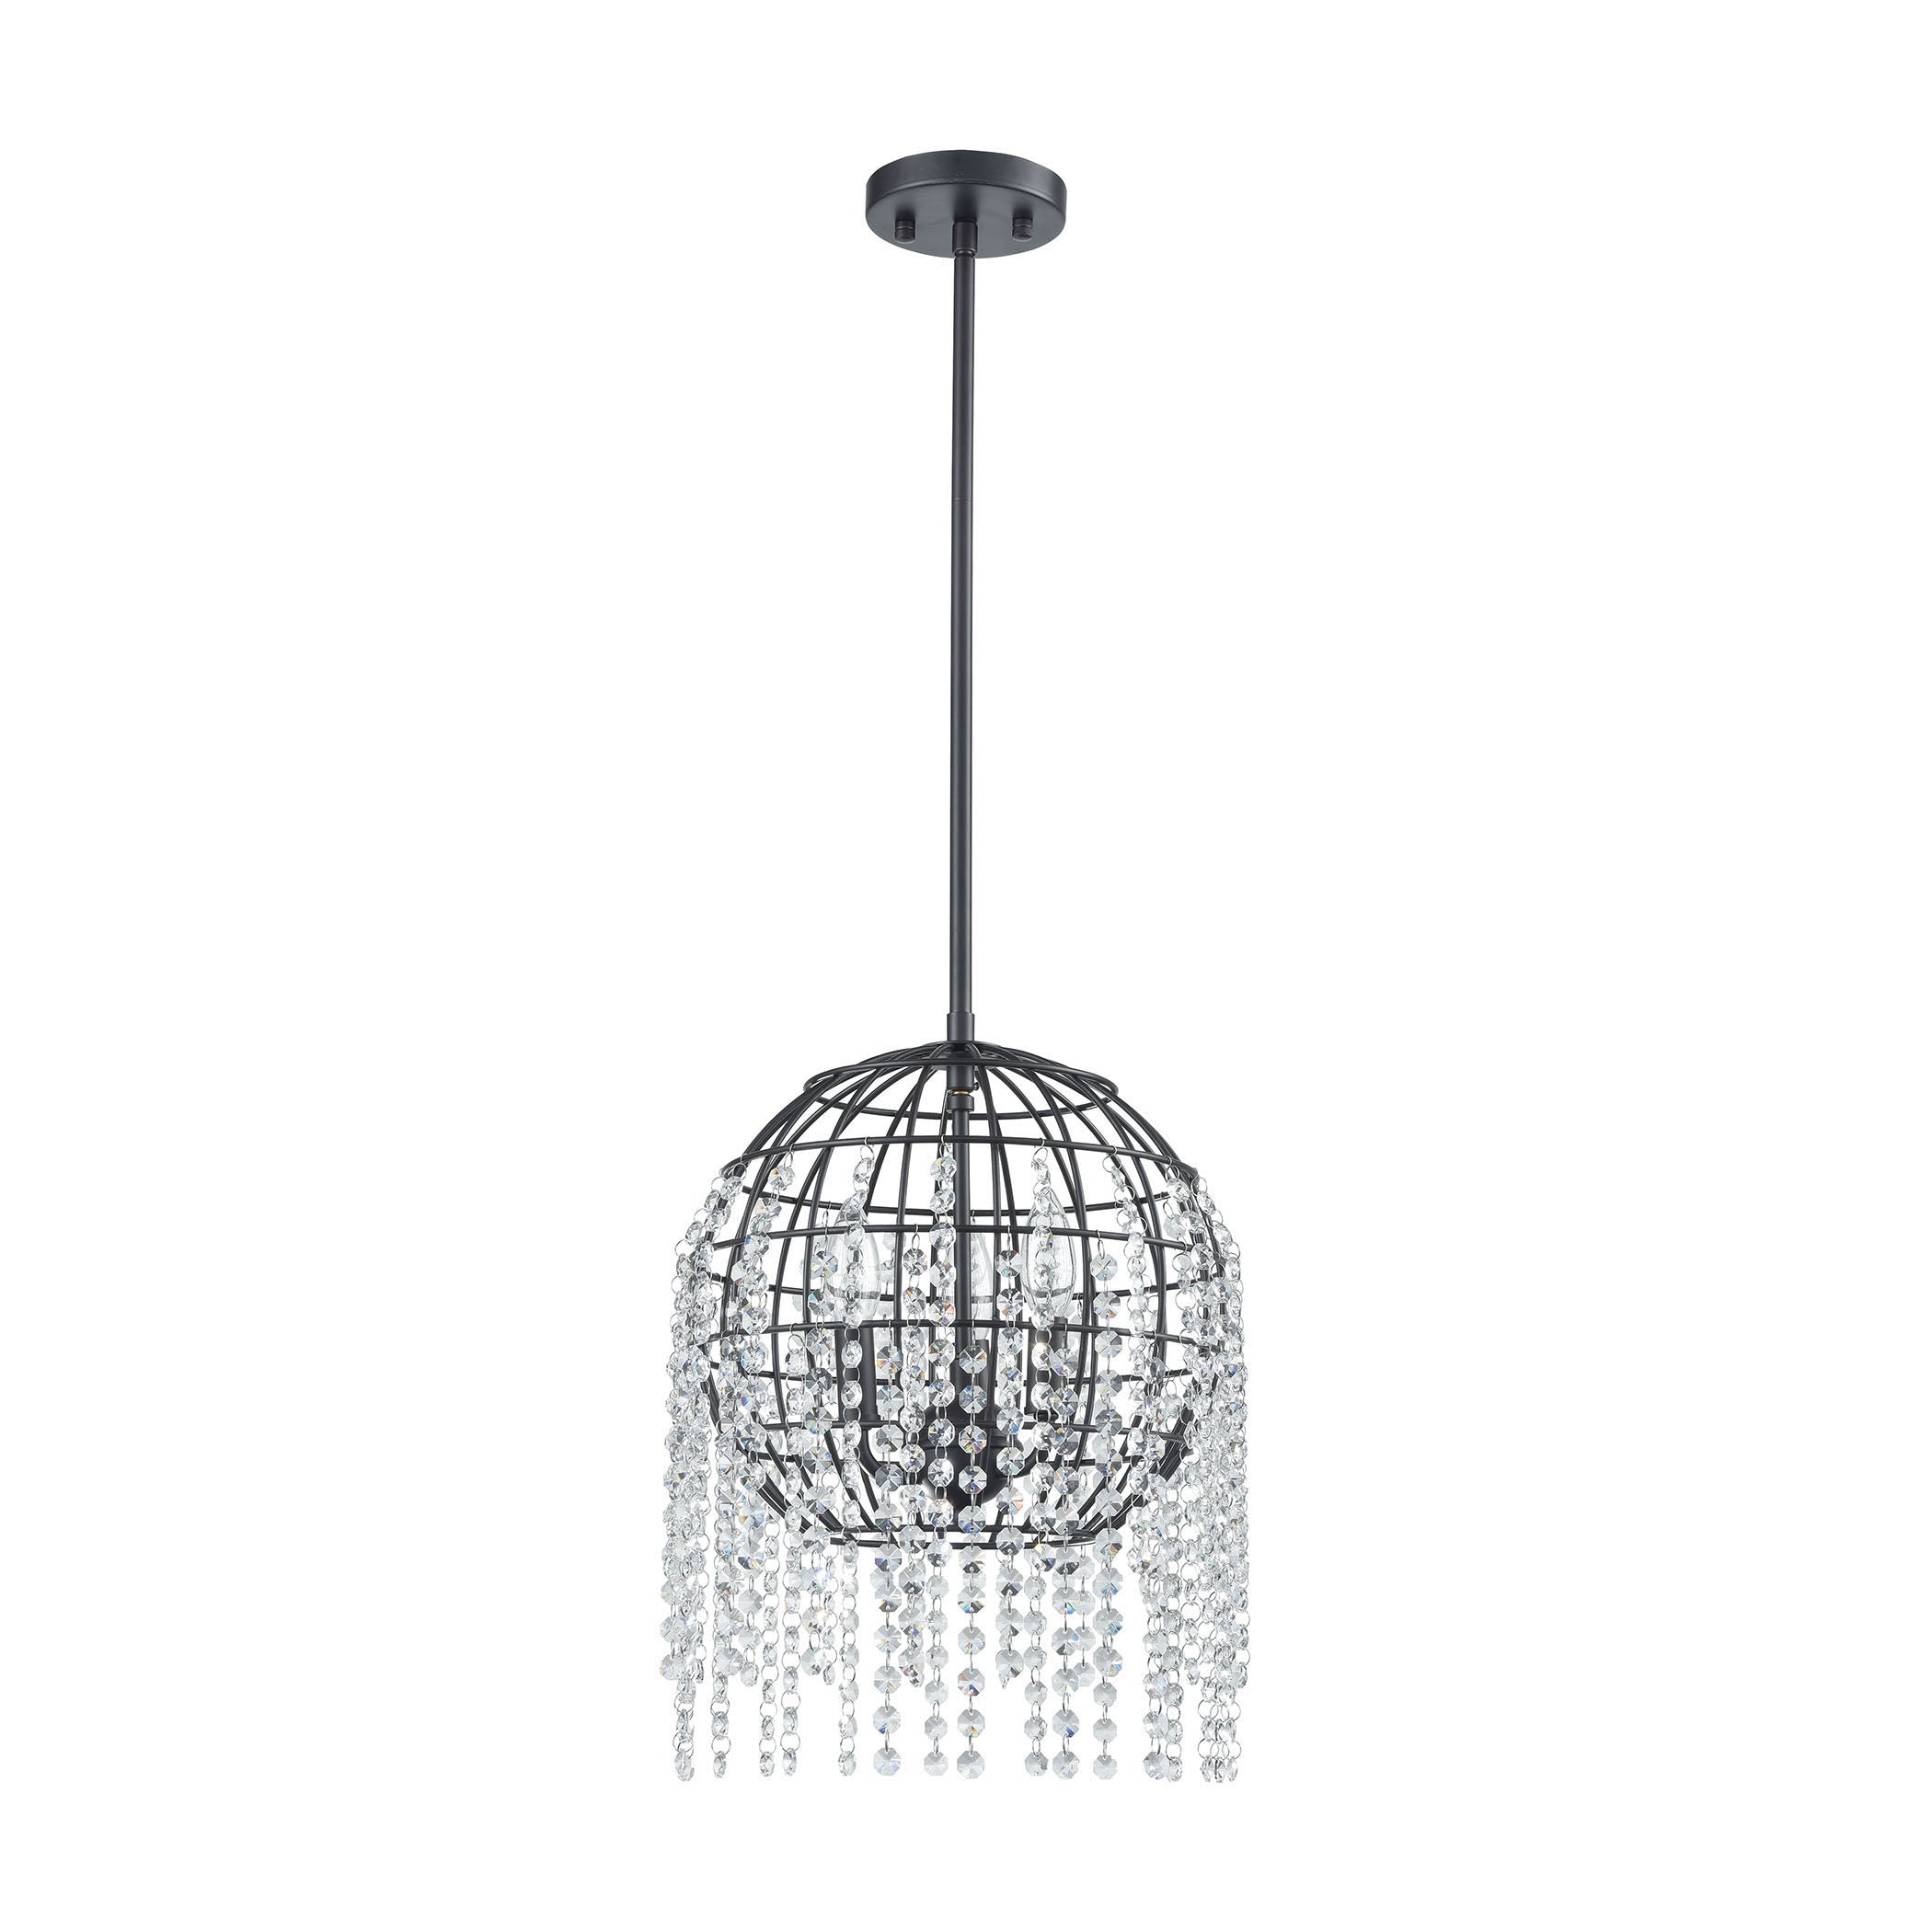 ELK Lighting 15304/3 Yardley 3-Light Pendant in Oil Rubbed Bronze with Wire Cage and Clear Crystal